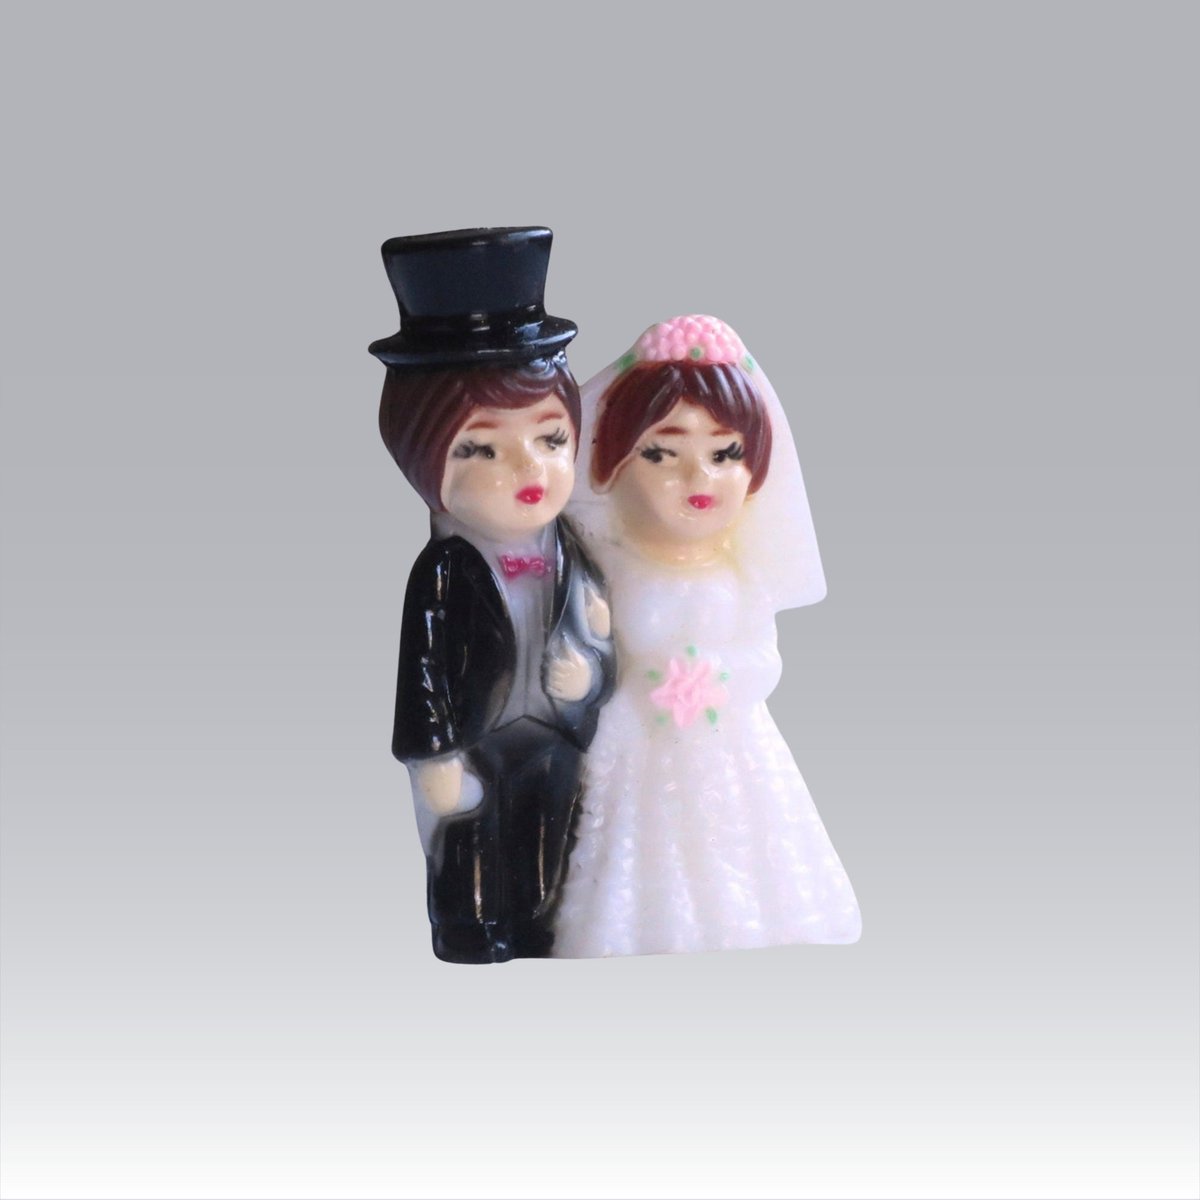 Vintage Mini Bride and Groom for Gift Package Adornments or Cake Topper tuppu.net/f3eee469 #EtsyteamUnity #SMILEtt23 #Vintage4Sale #Dad2024